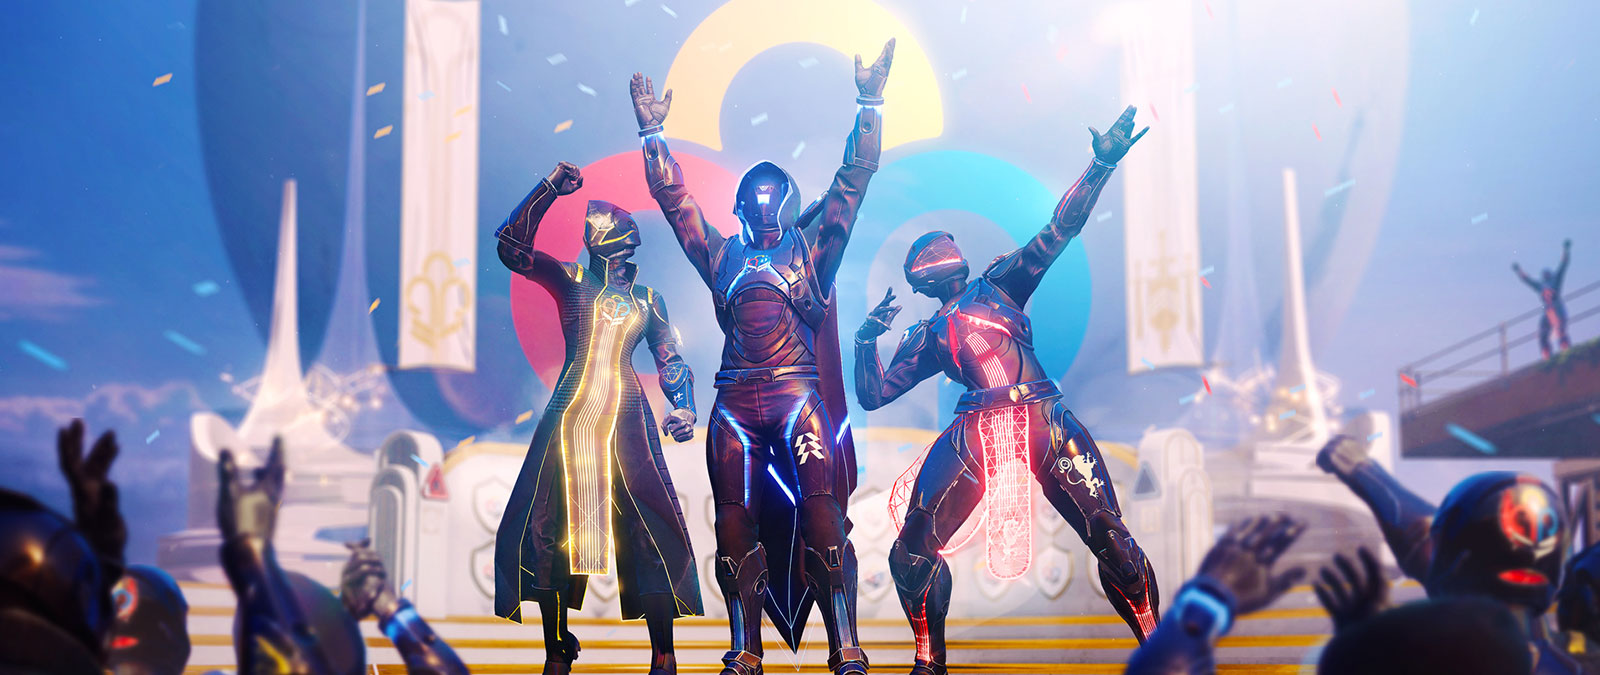 Three players in neon armored suits strike a victory pose during a celebration. 